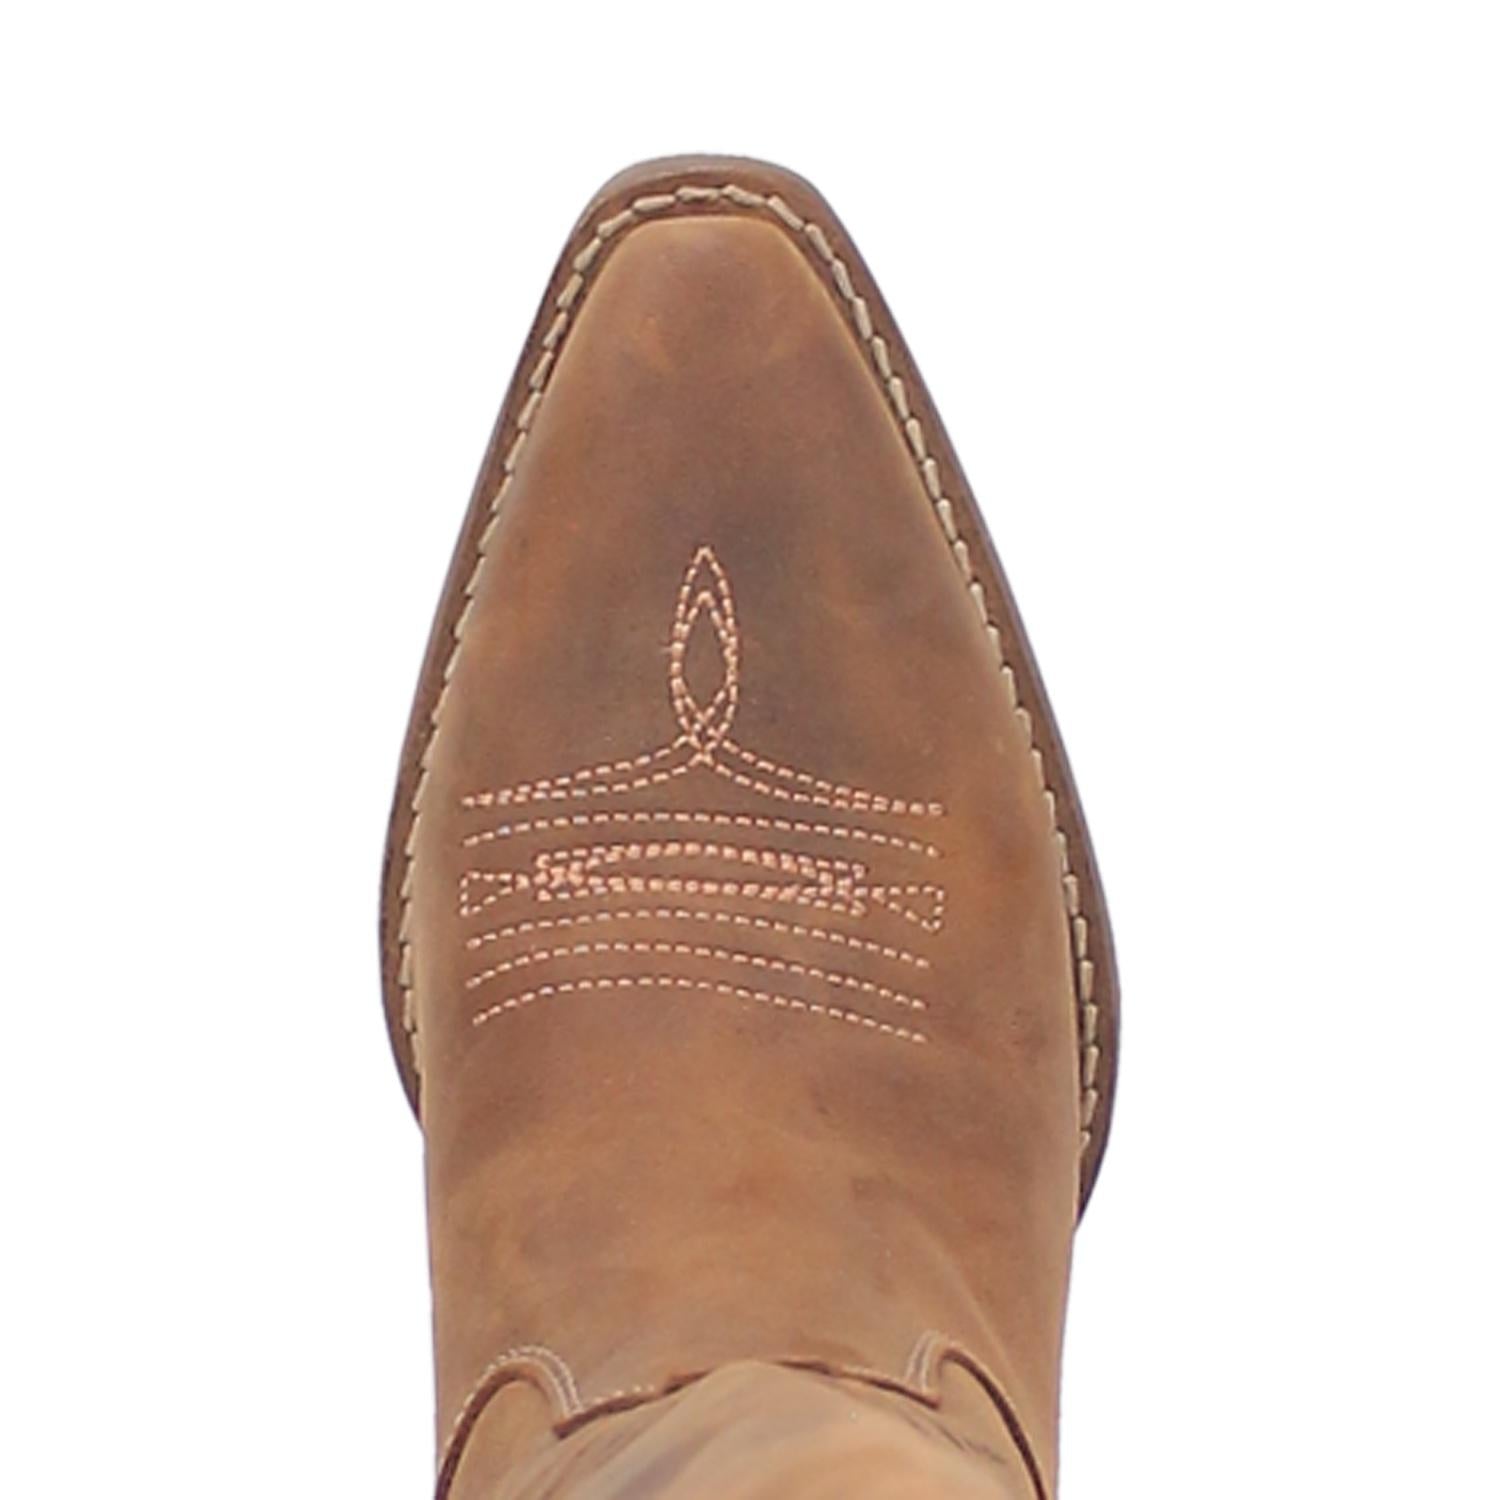 A tall brown leather boot with a short heel, stitched desings at the top and bottom, lace up back, fringe down the right side, and a half zipper. Item is pictured on a plain white background